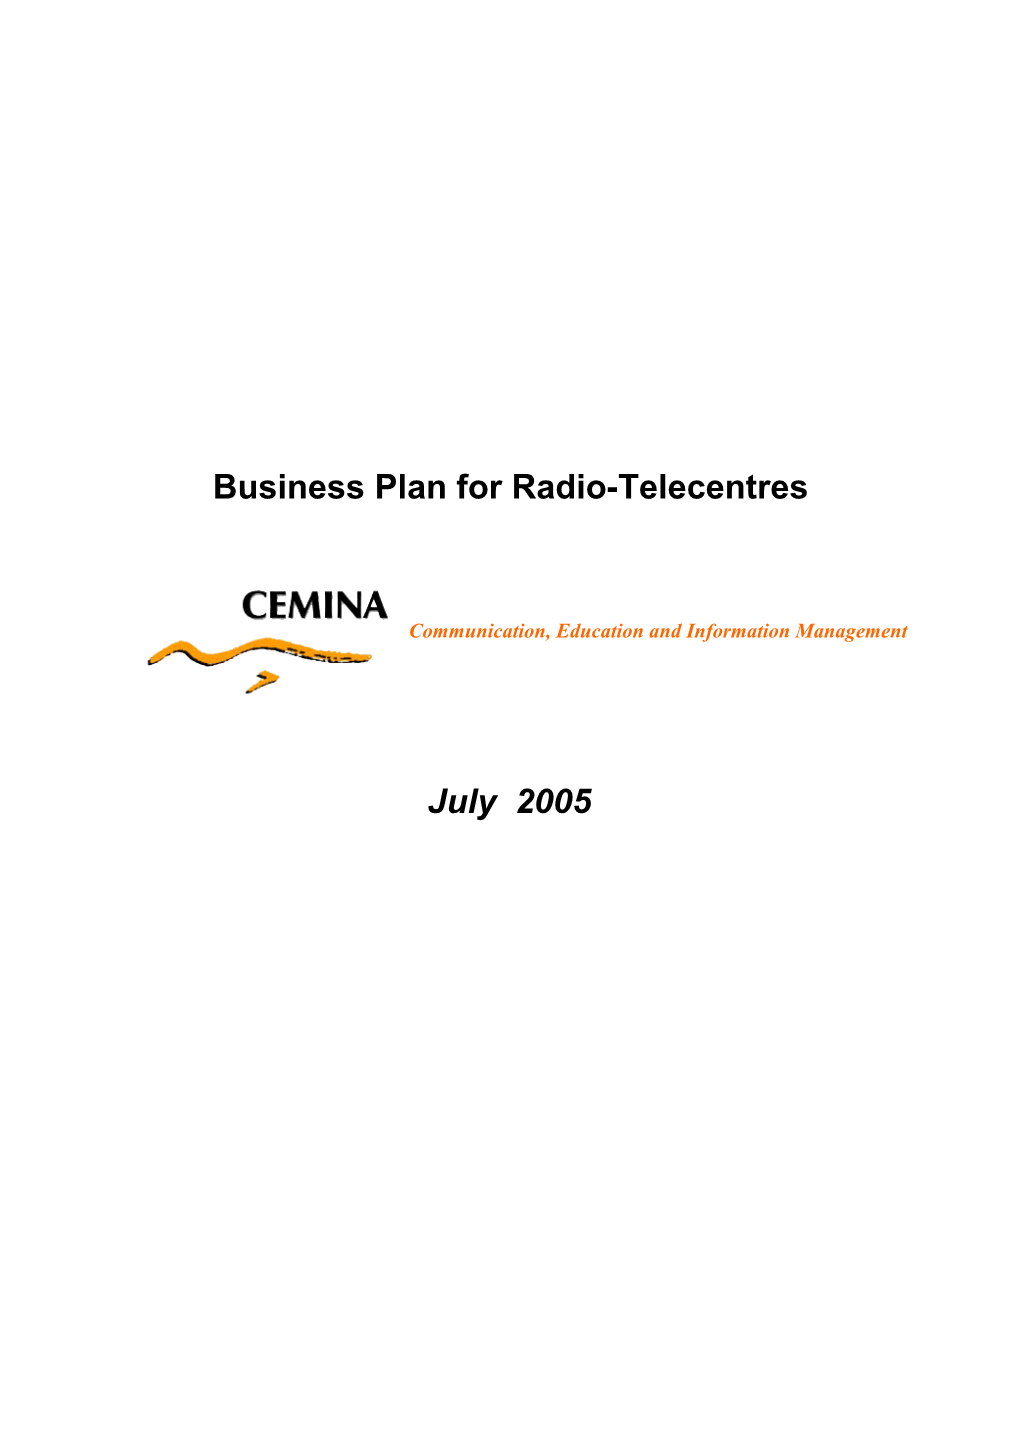 Business Plan for Radio-Telecentres